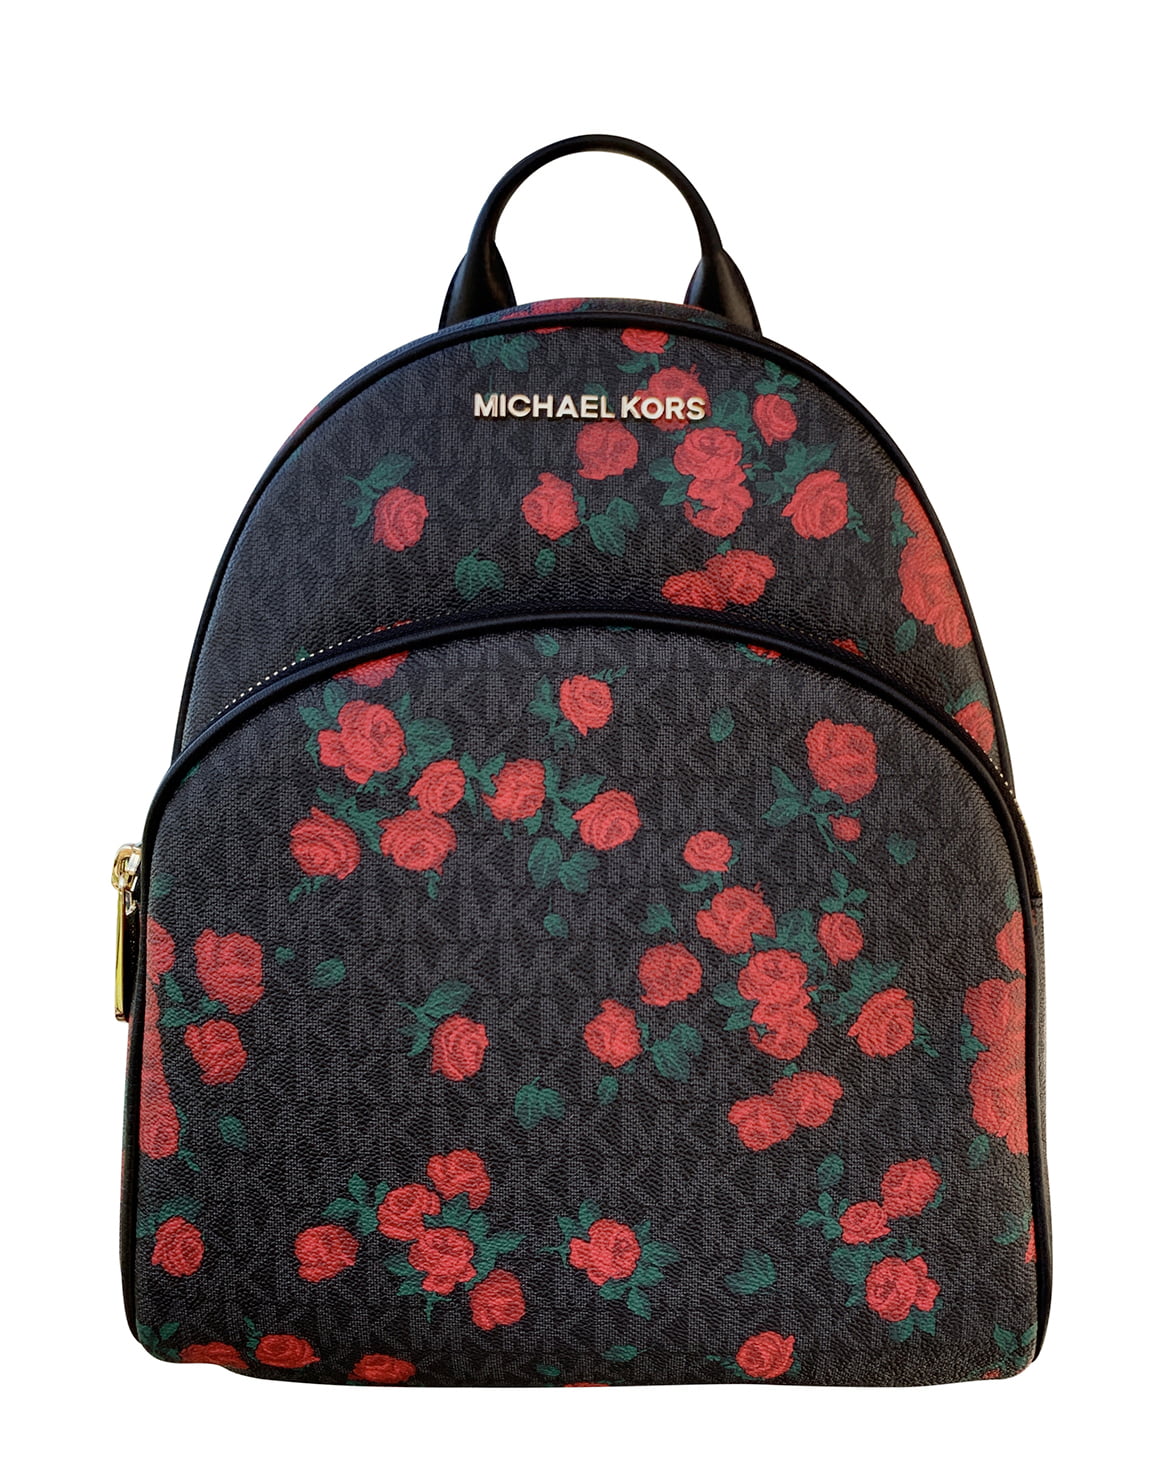 michael kors backpack with roses